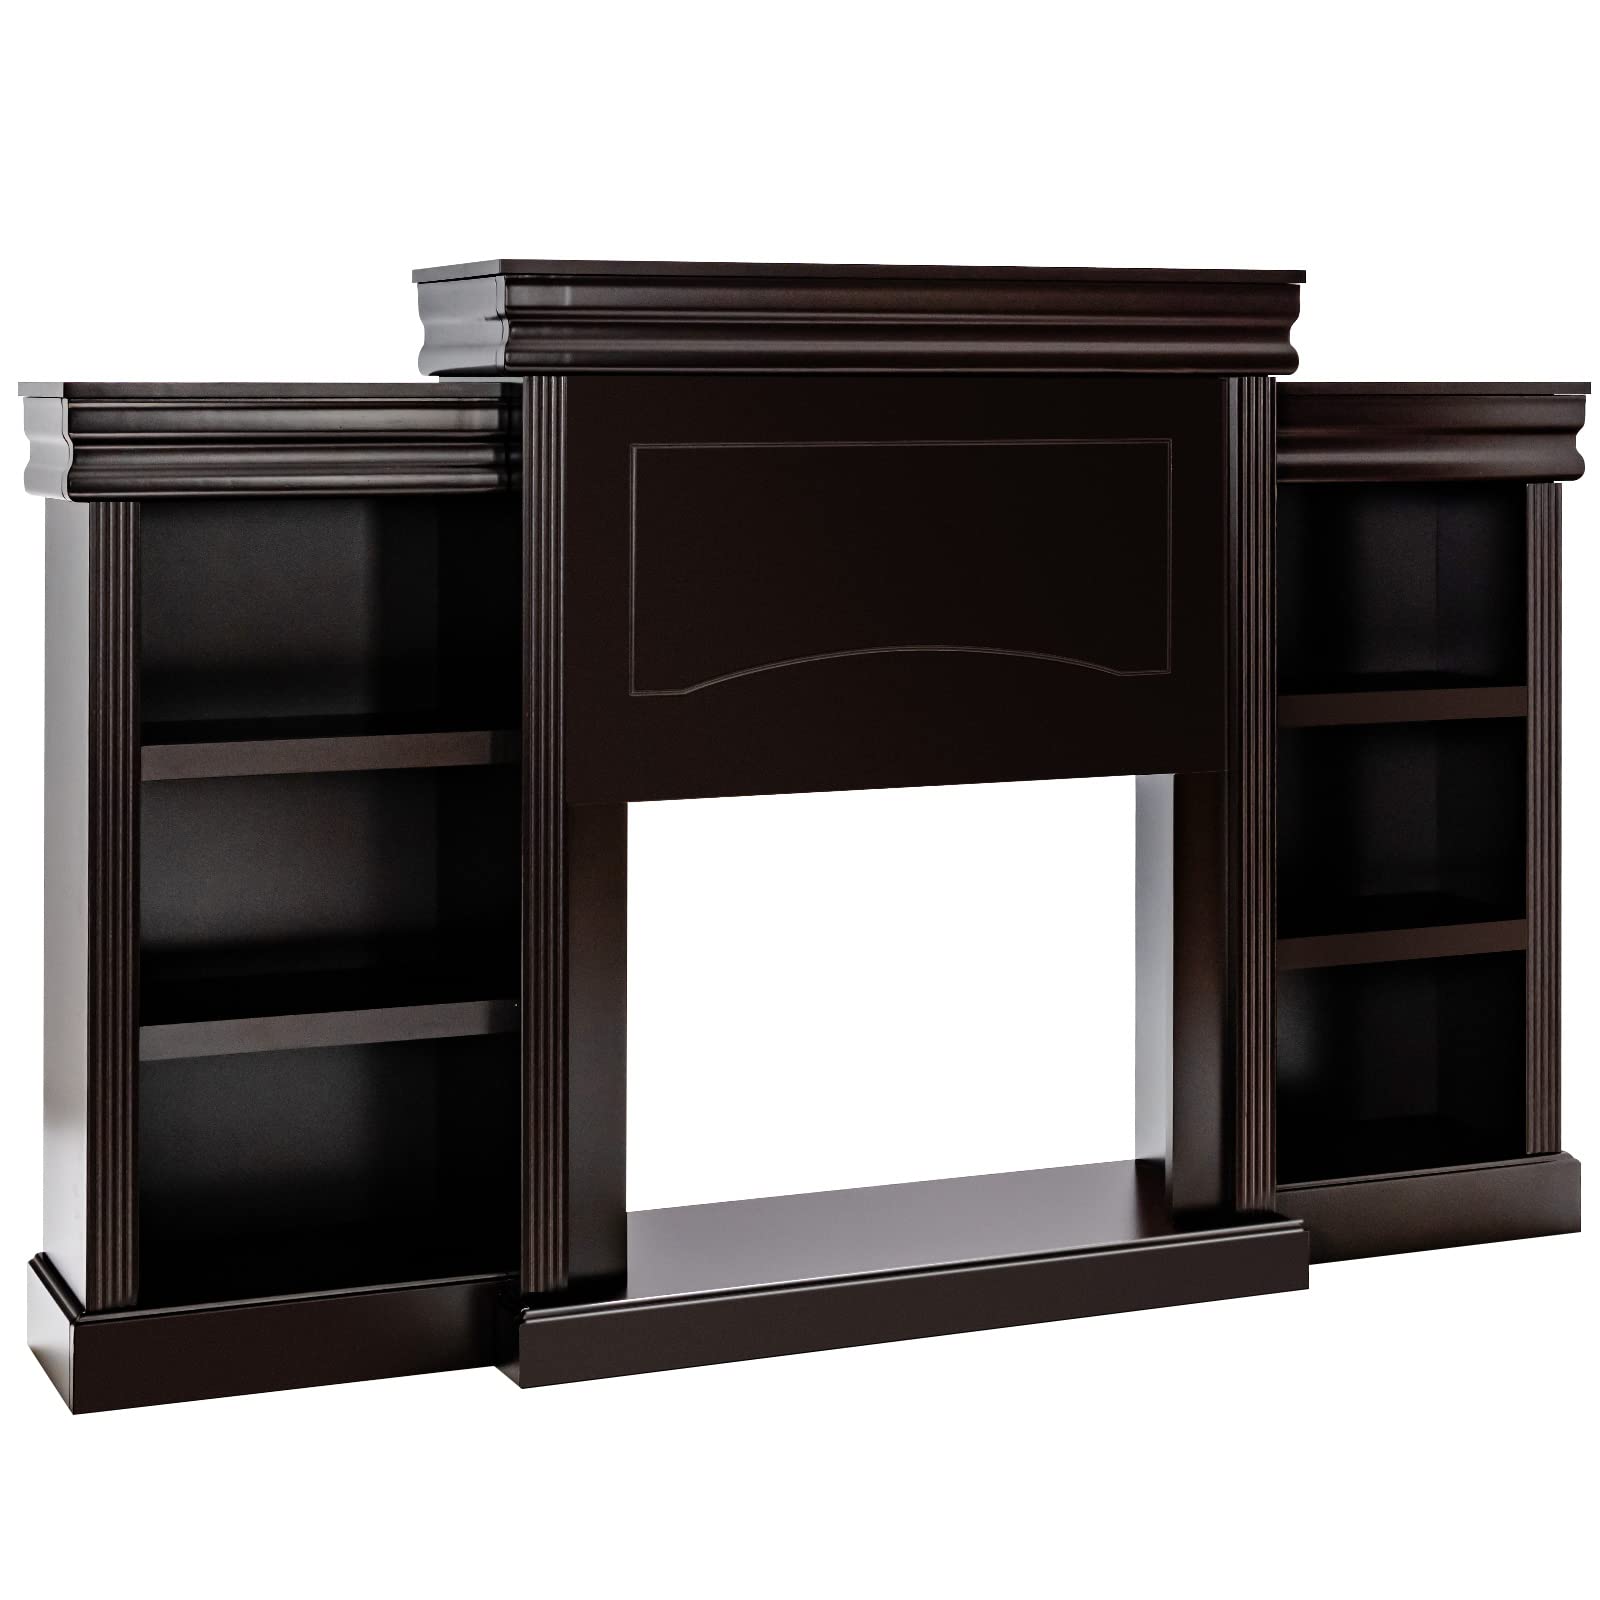 70 Inches Freestanding Mantel Stand - Tangkula